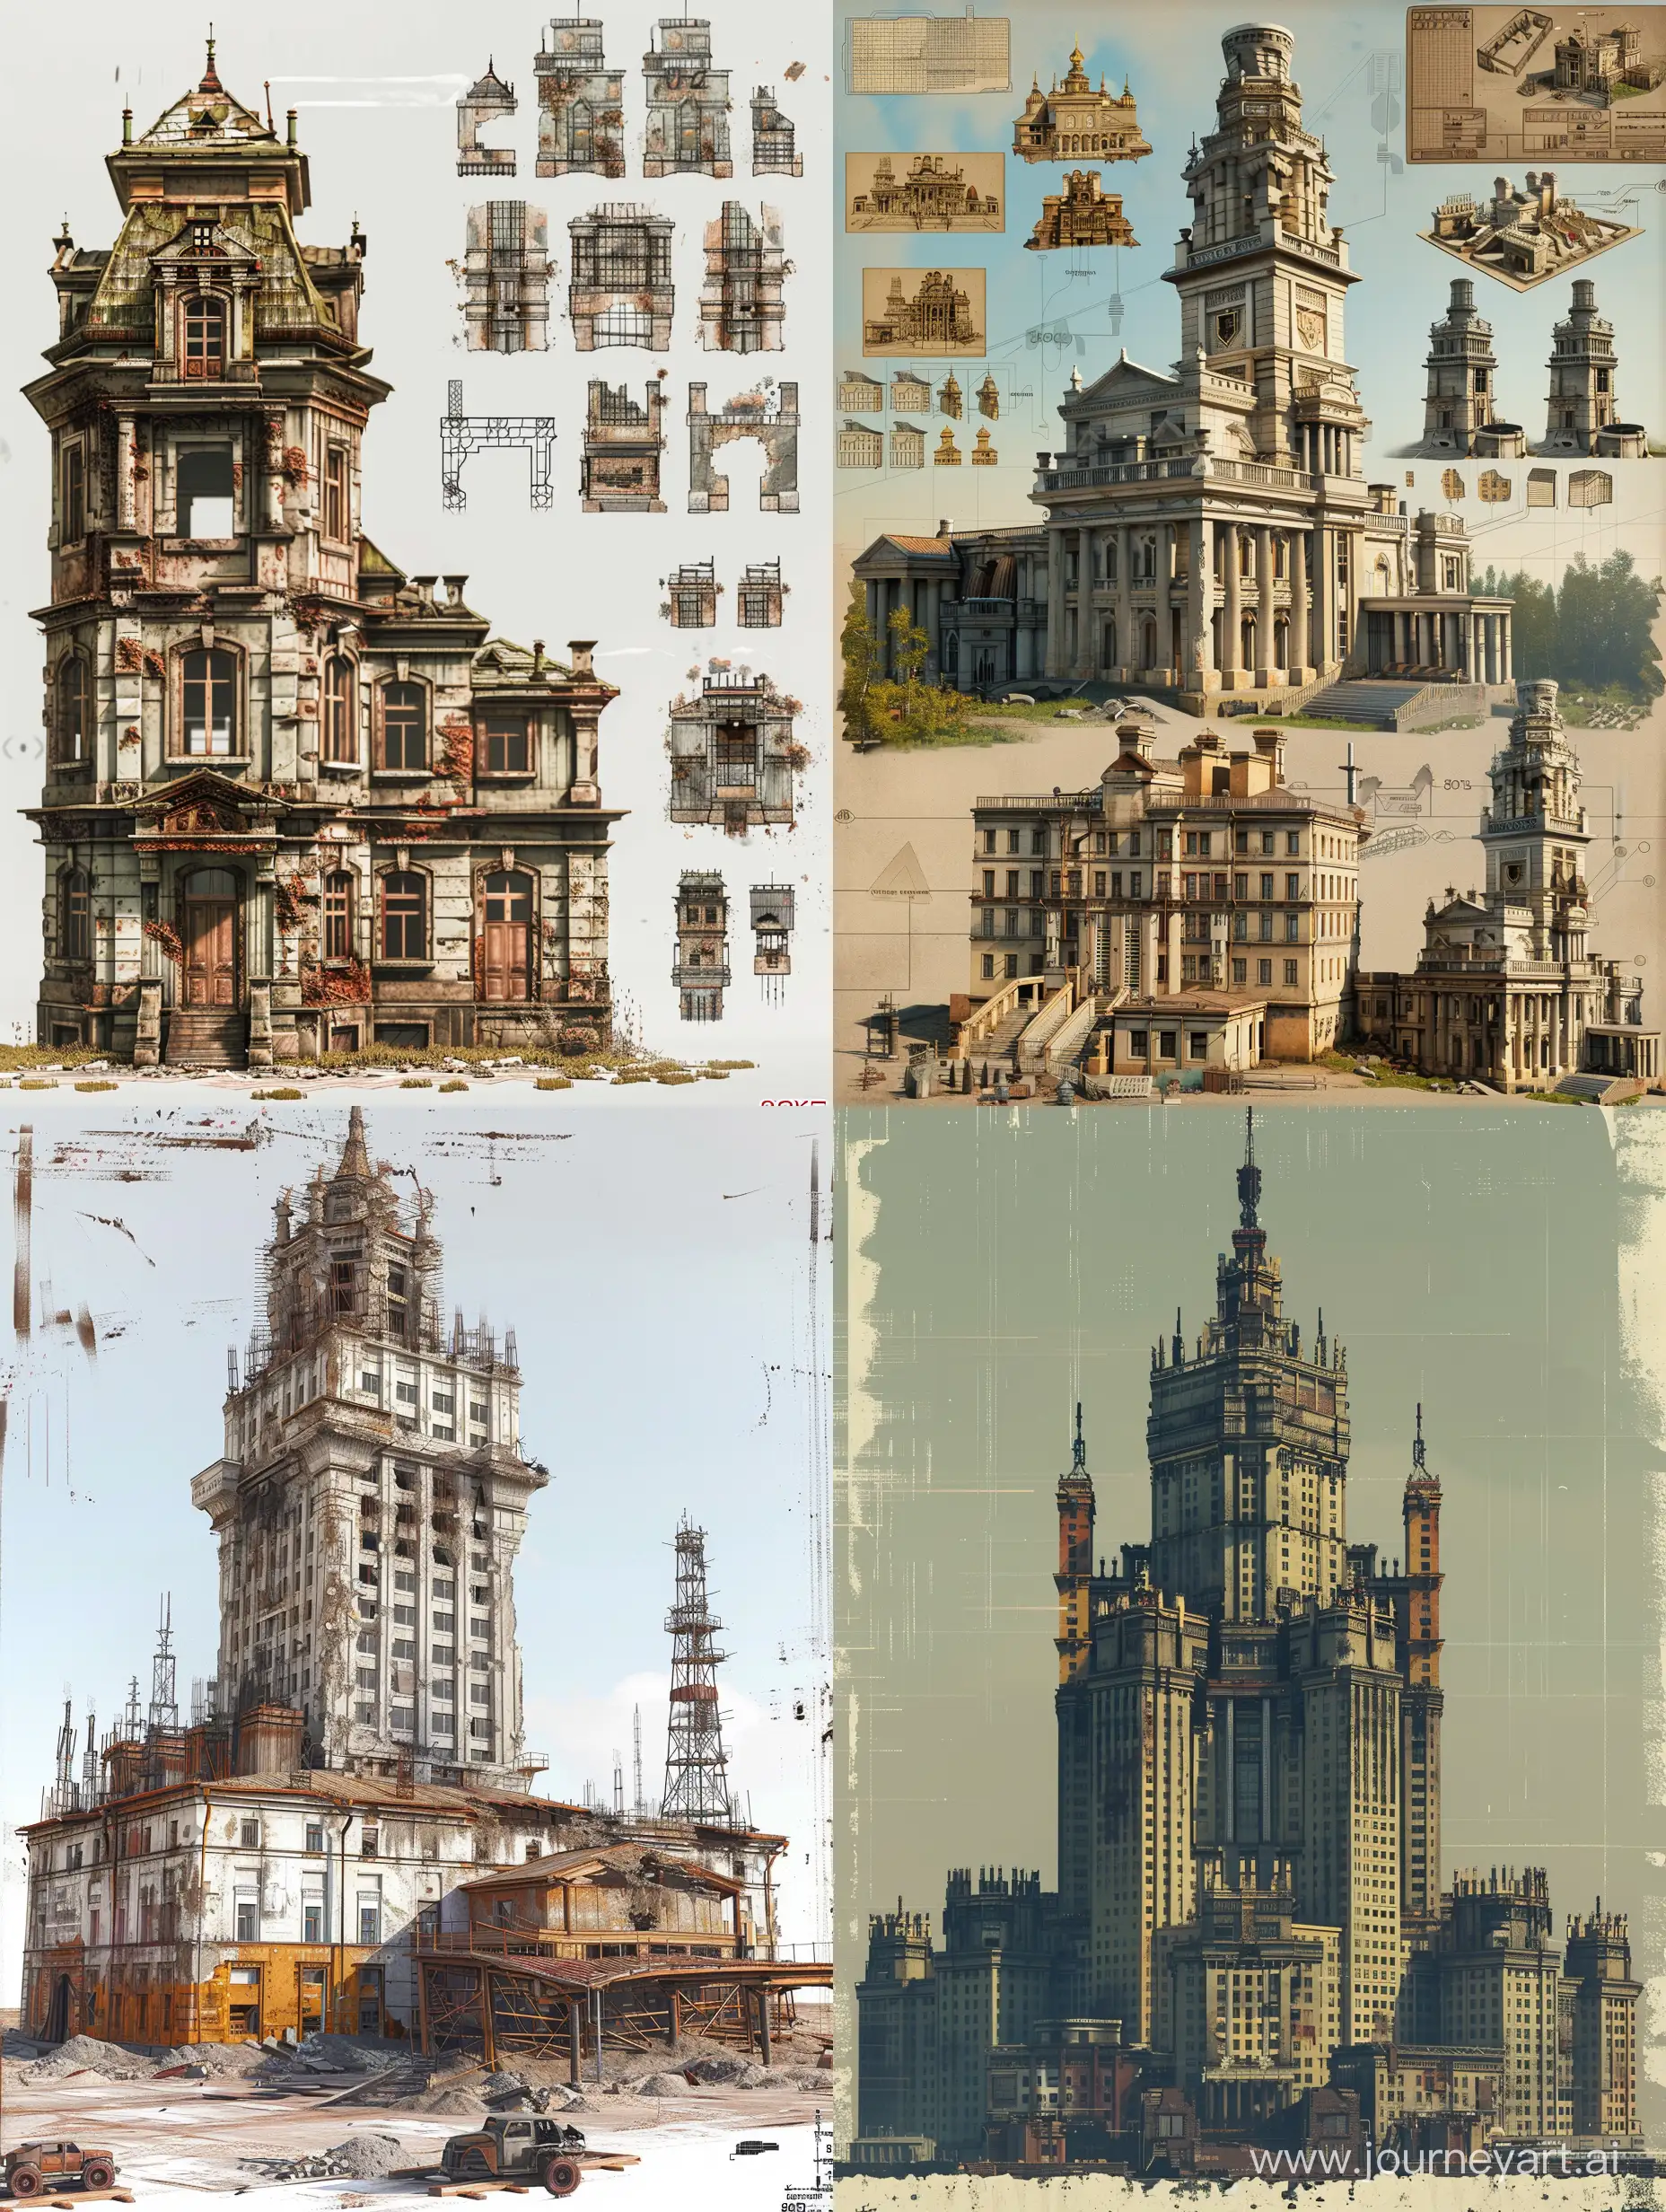 PostApocalyptic-Cyberpunk-Cityscape-with-Russianstyle-House-and-Tower-of-the-Future